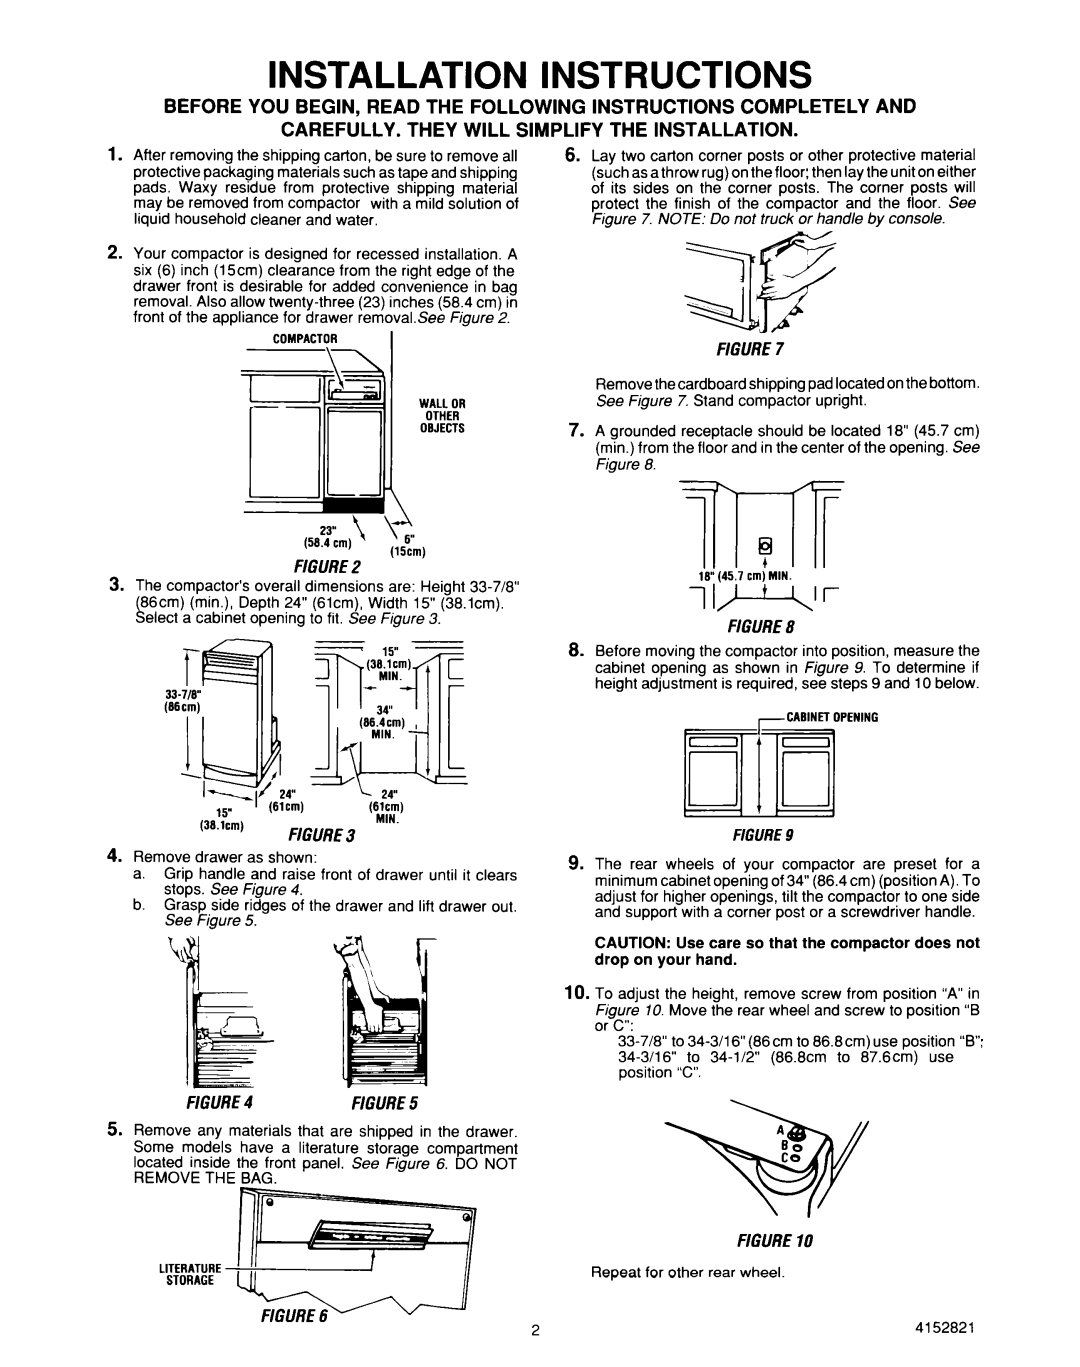 Whirlpool 4152821 installation instructions Instructions, Carefully. They Will Simplify The Installation, 7l?-lT, If-V 